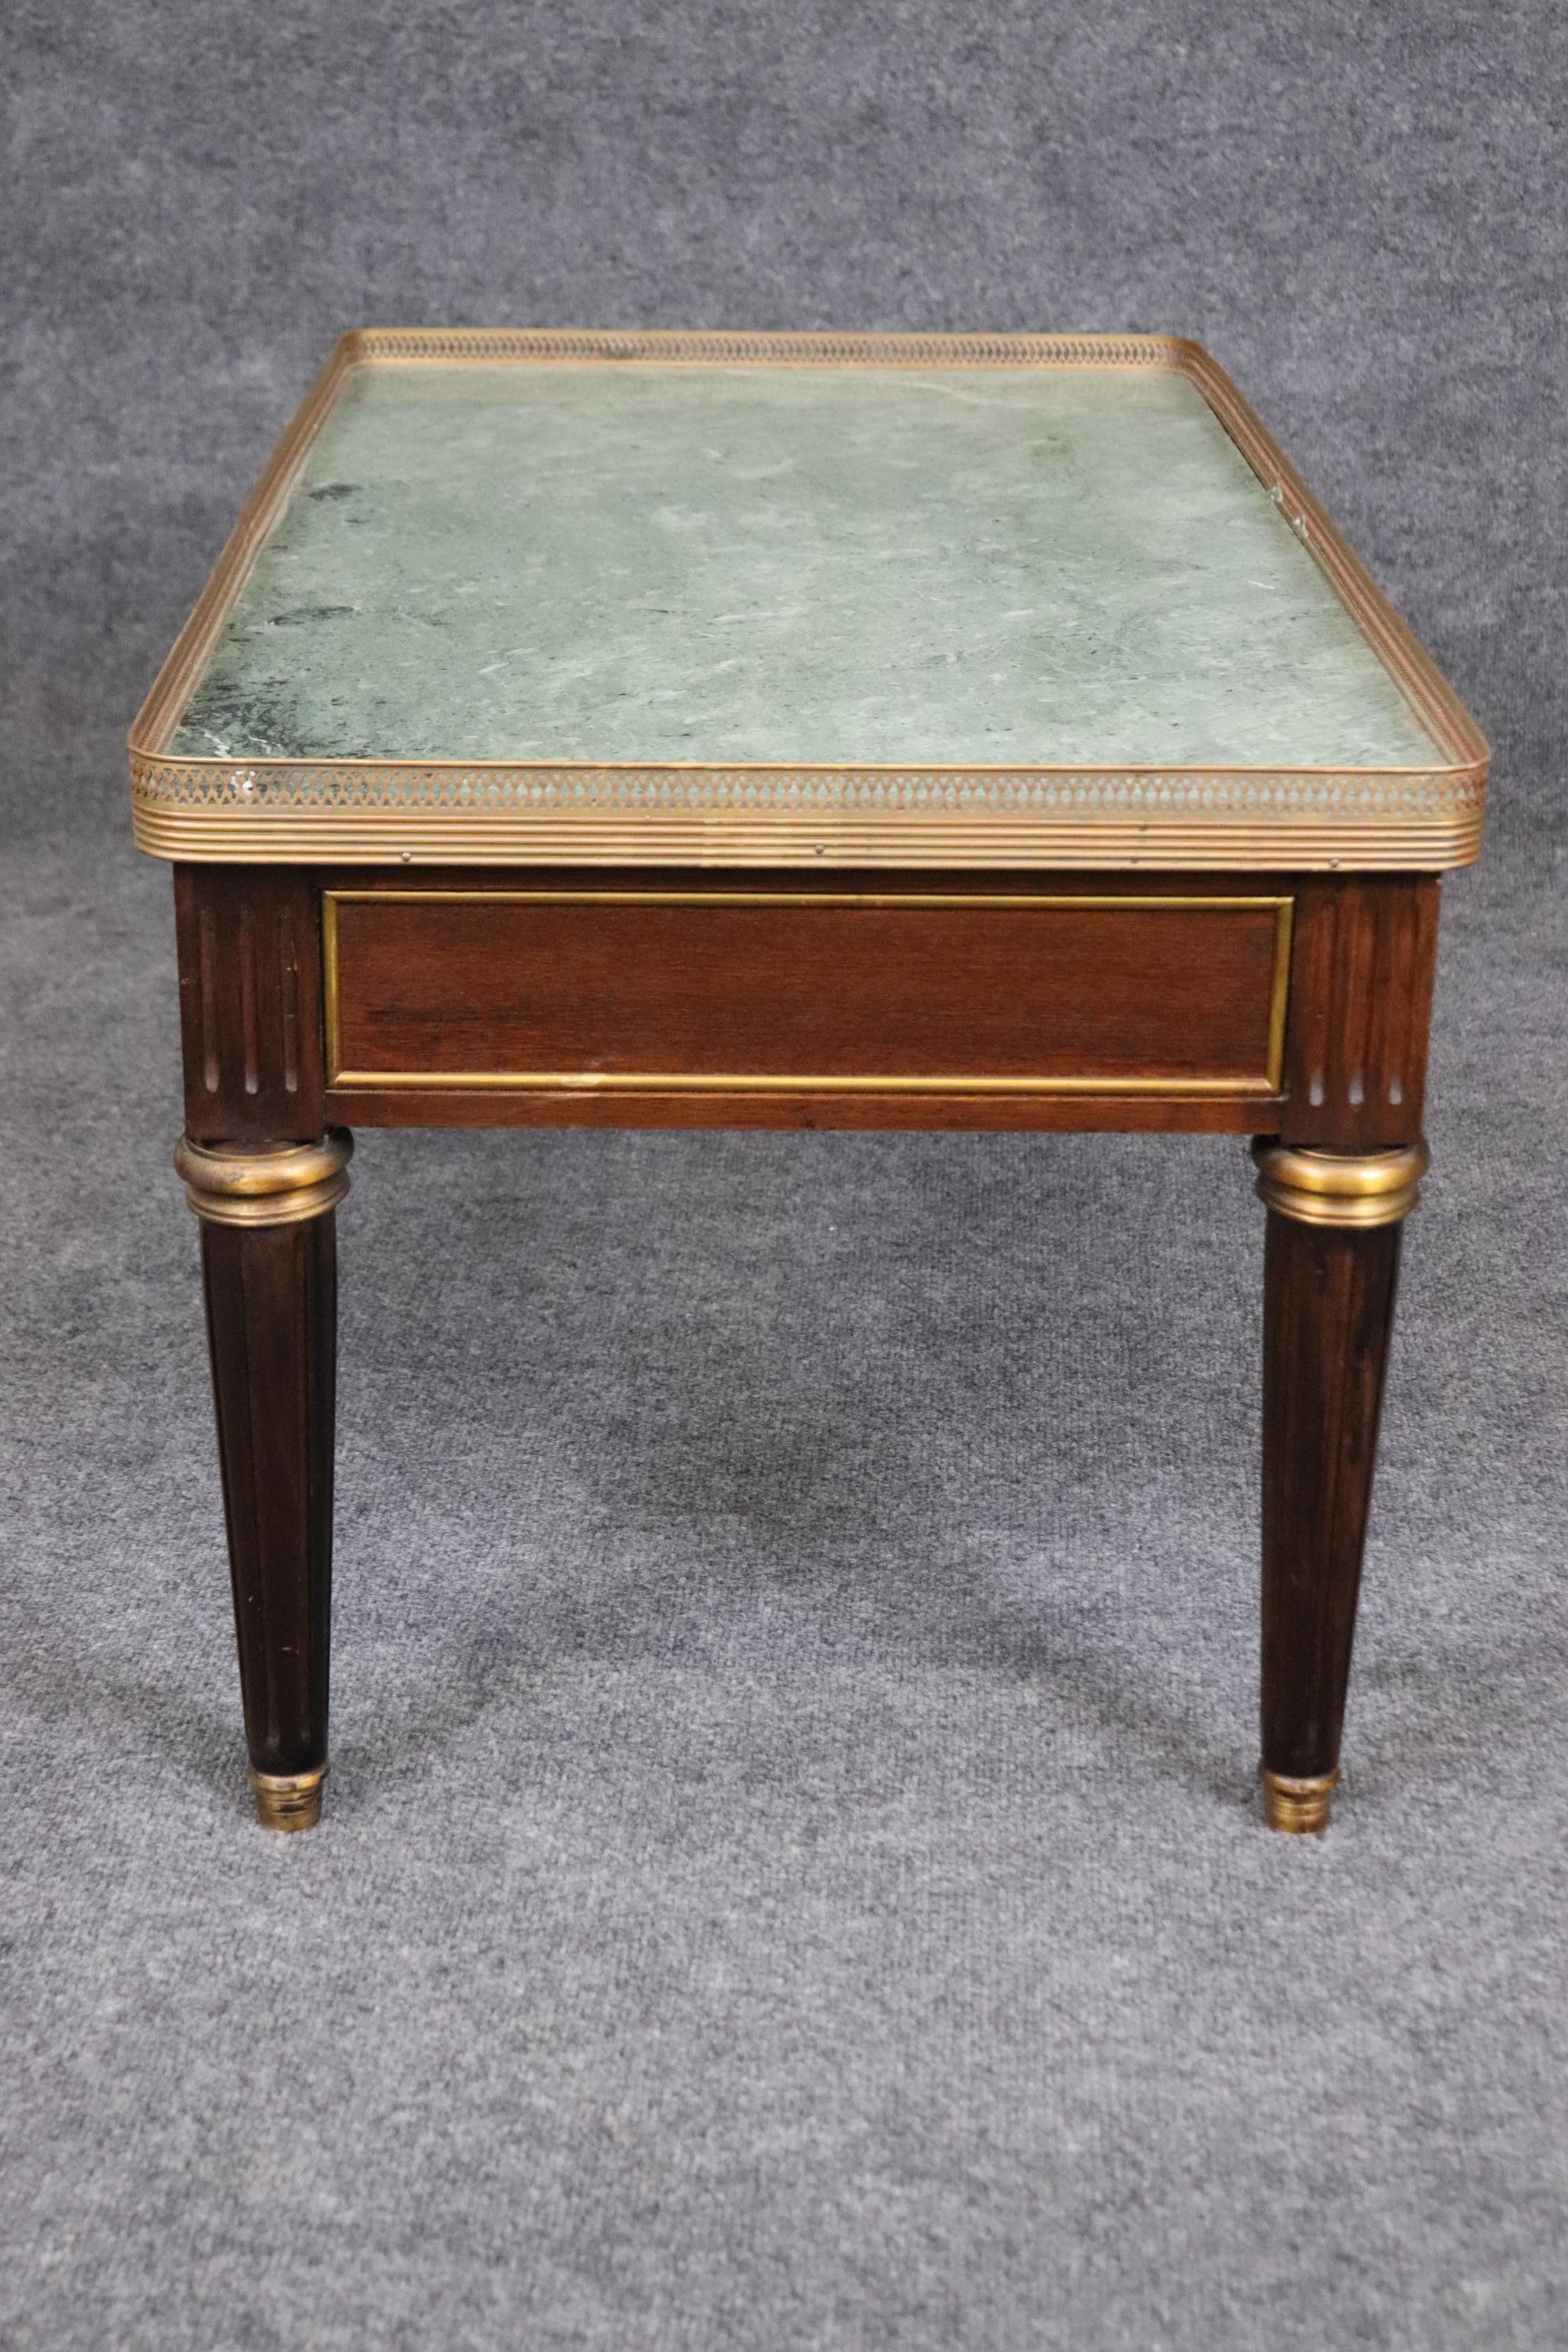 Argentine Louis XVI Style Marble Top Coffee Table Attributed to Maison Jansen For Sale